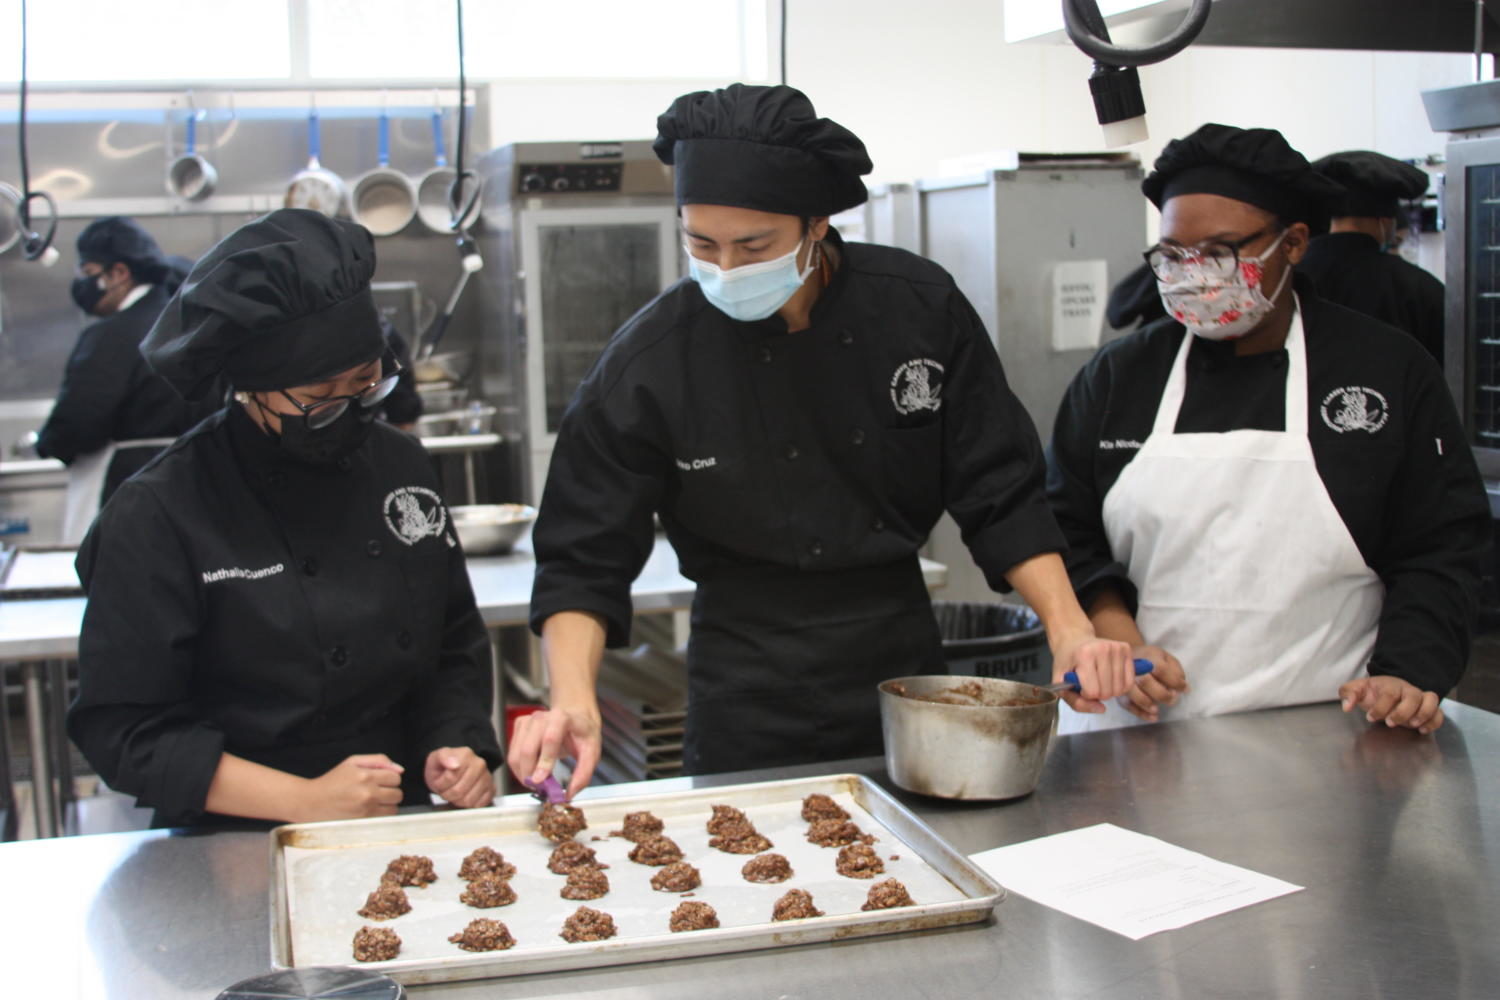 Culinary II students explore different recipes in the kitchen